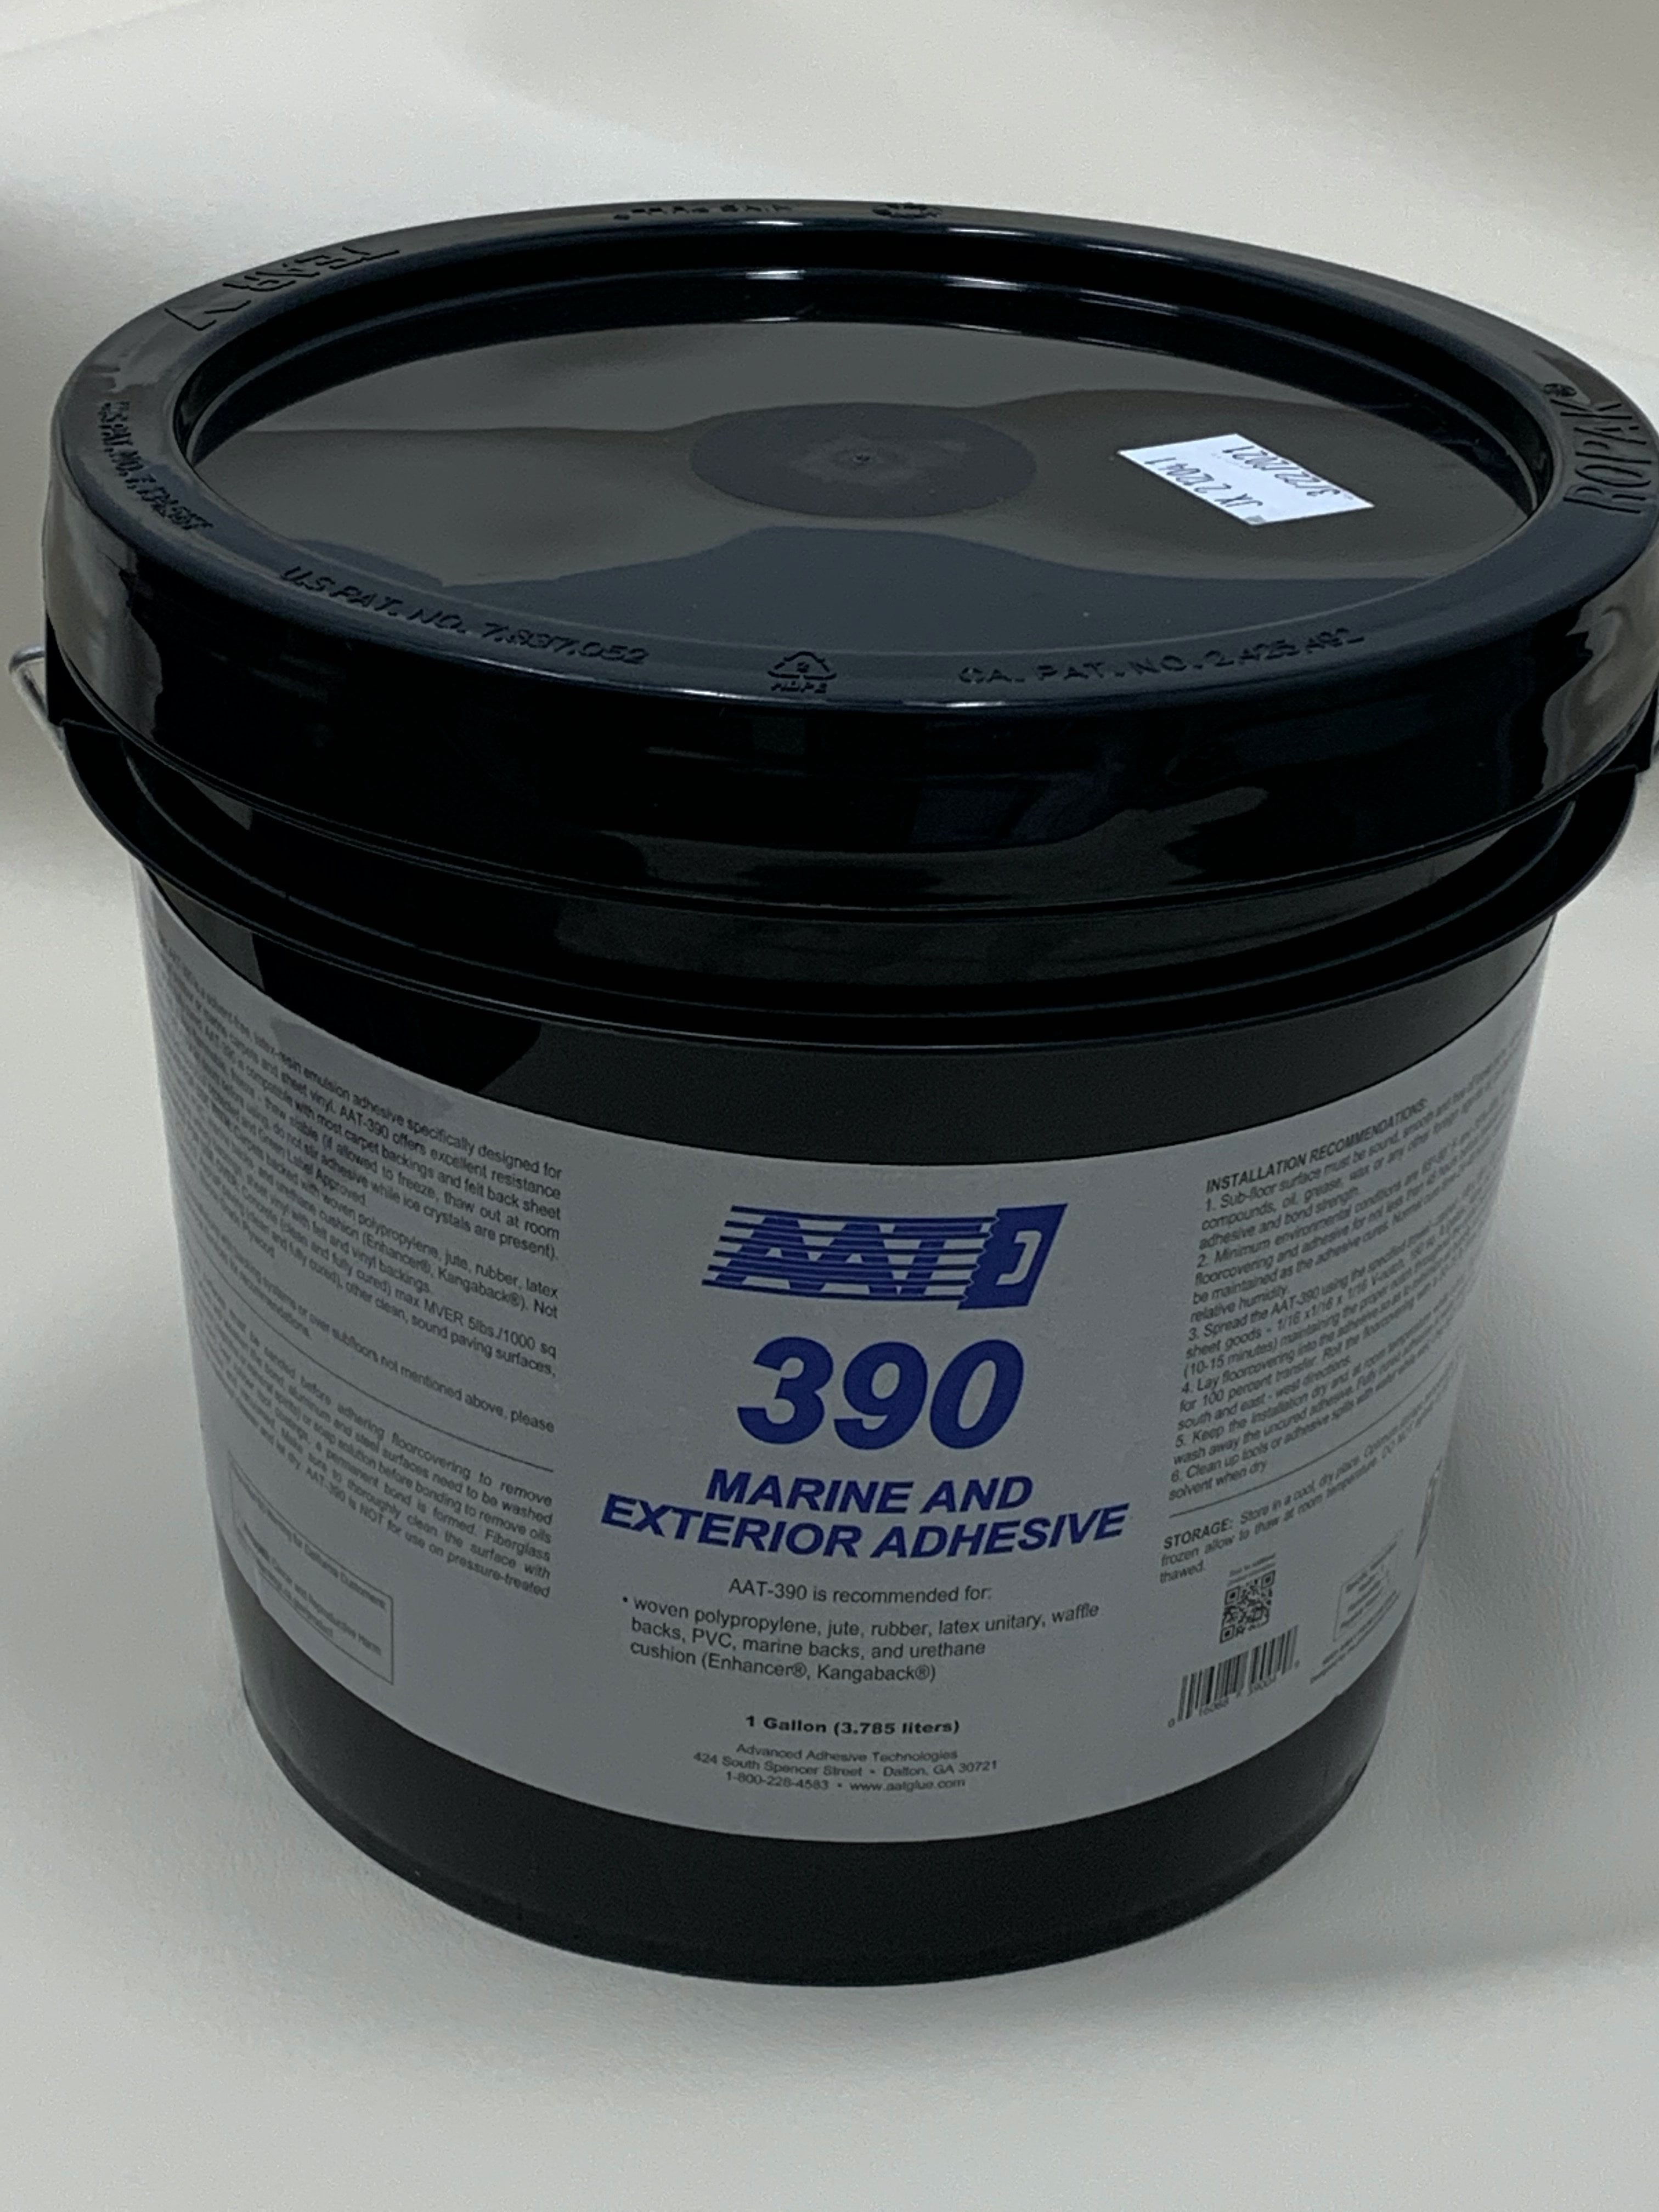 Cable Adhesive - GLUEDEVIL - Bonds on many surfaces